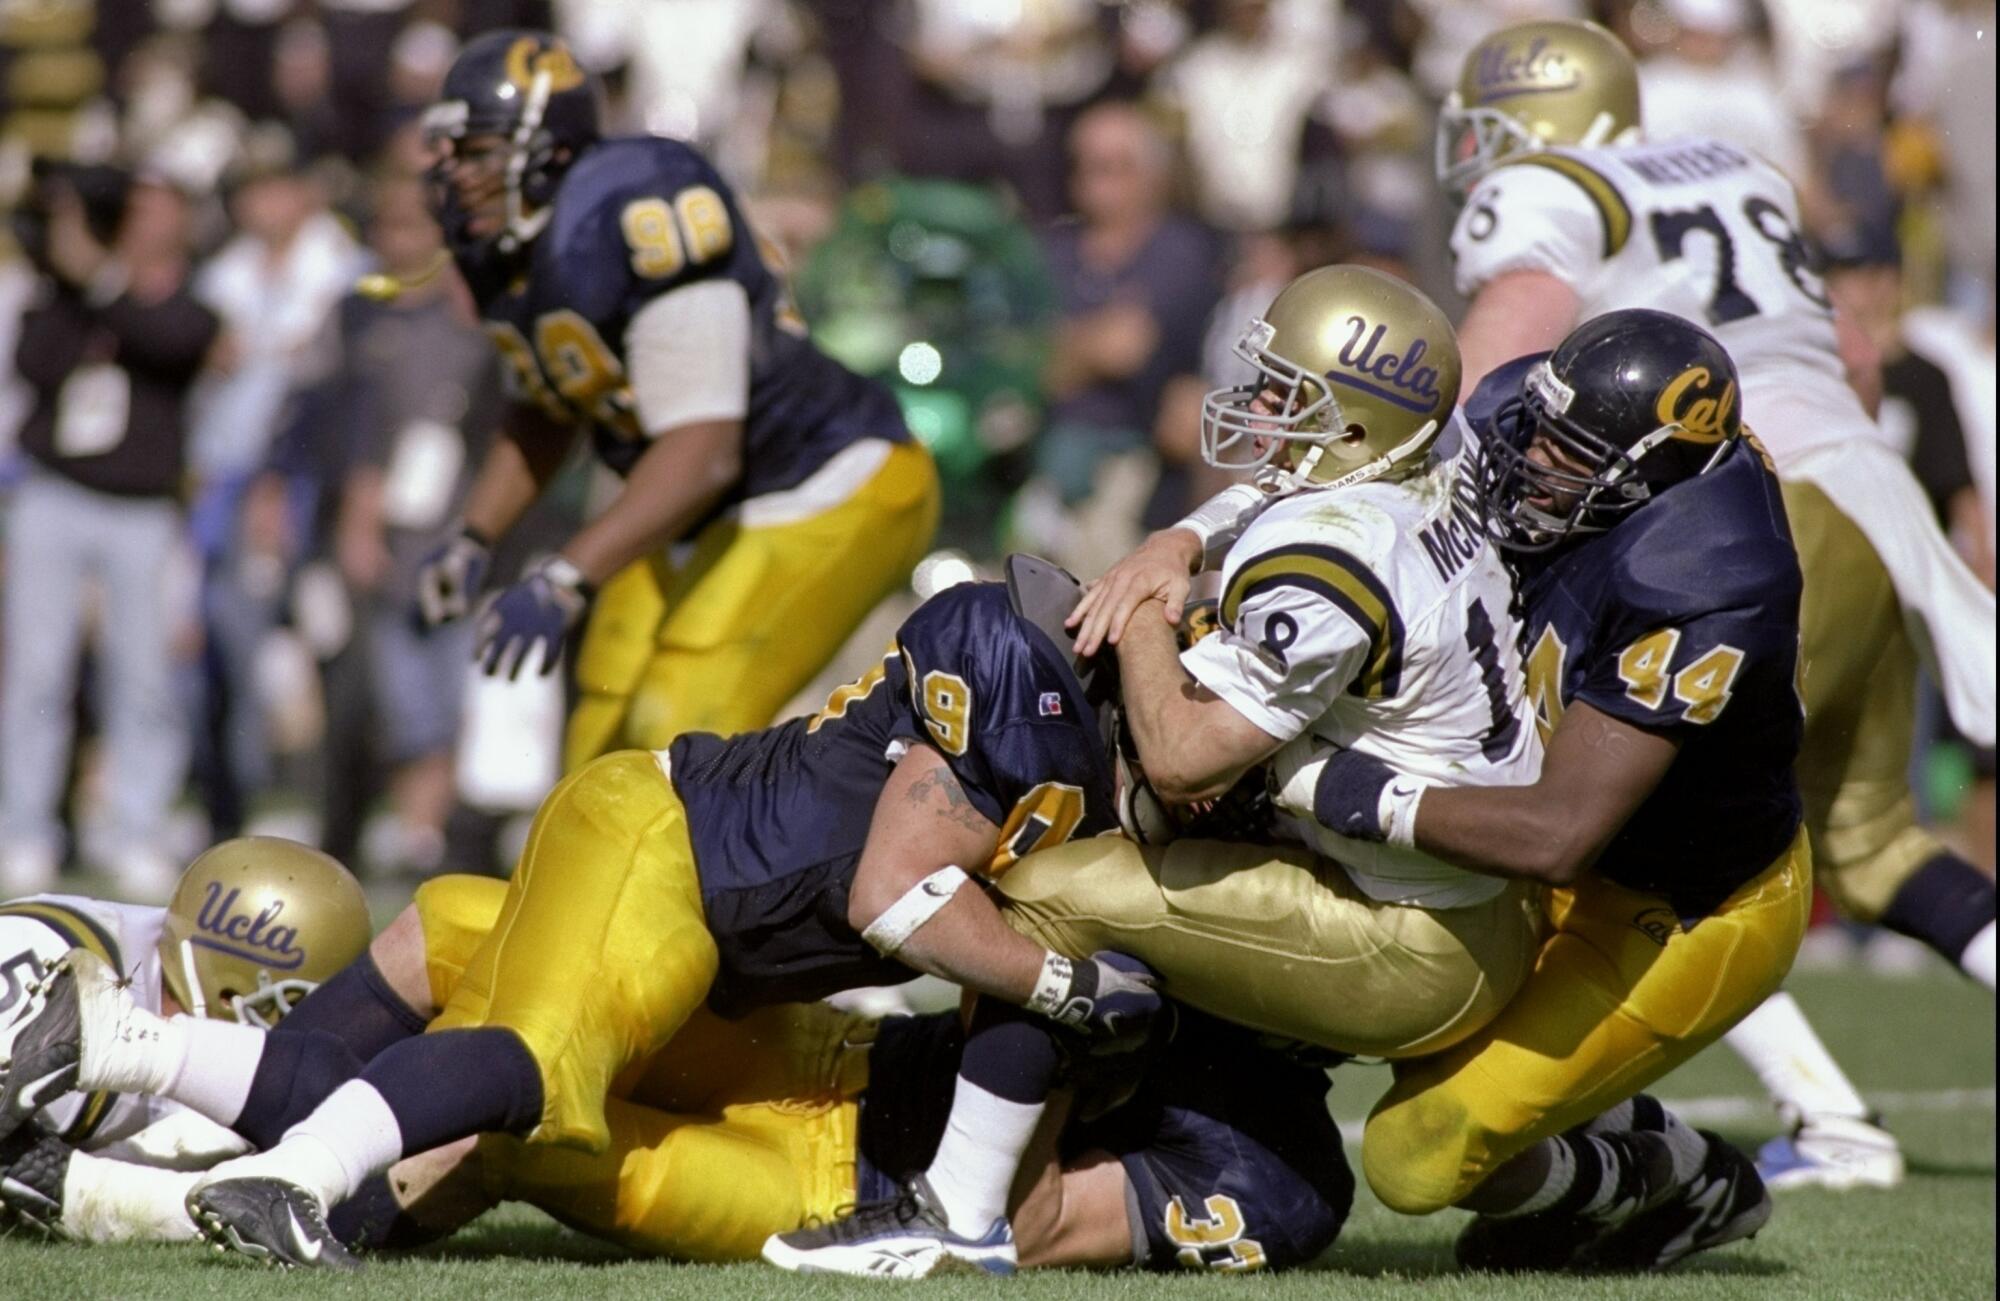 UCLA quarterback Cade McNown is tackled by Cal's Albert Dorsey and Nate Geldermann on Oct. 24, 1998.